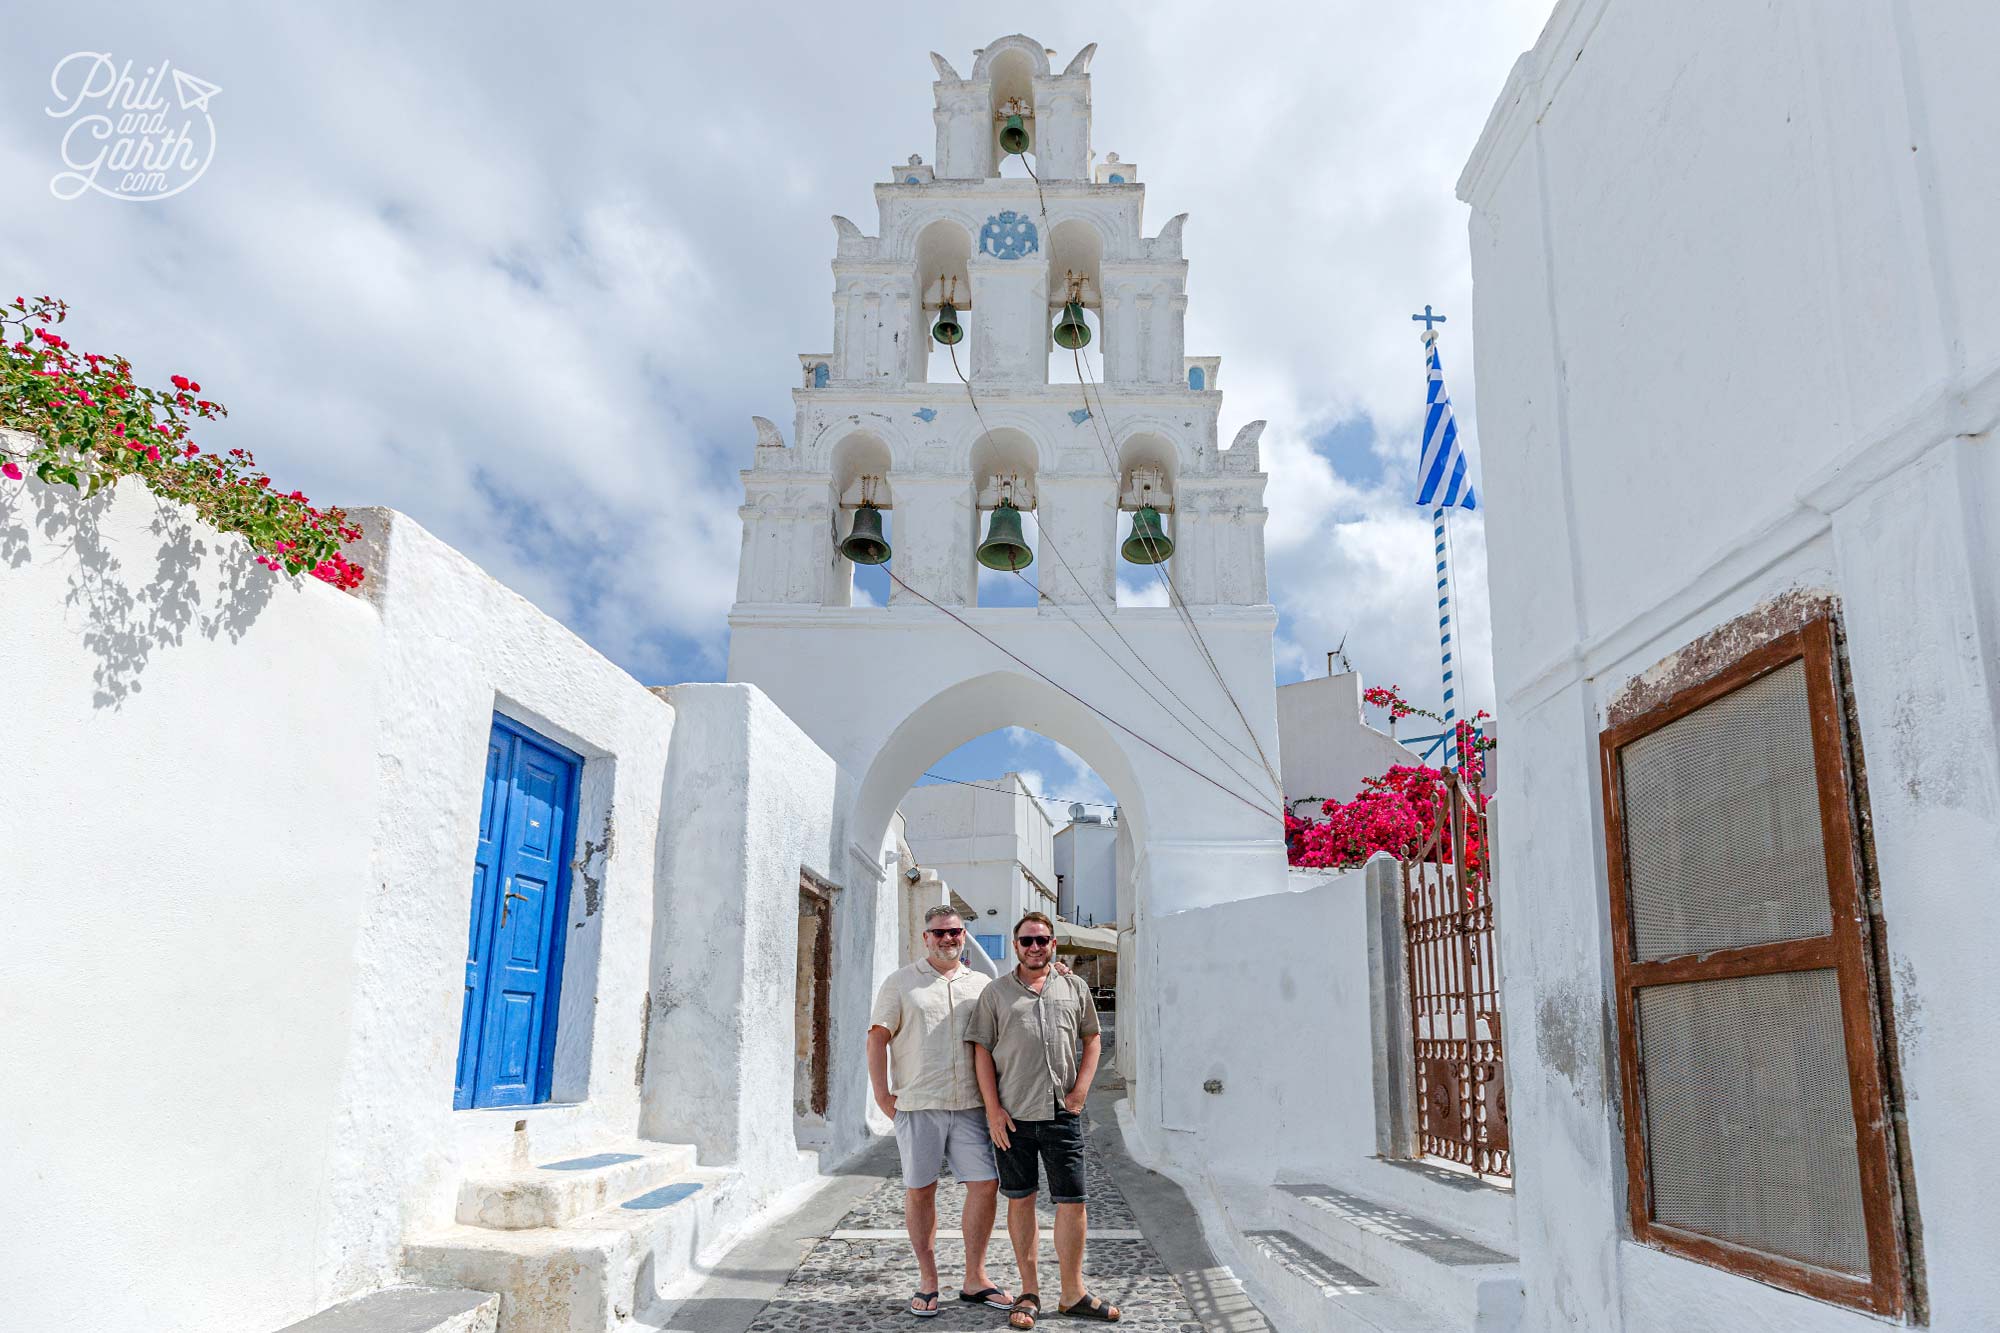 Santorini Instagram Spots: The Megalochori bell tower stands tall as a symbol of the village’s rich history and architectural beauty